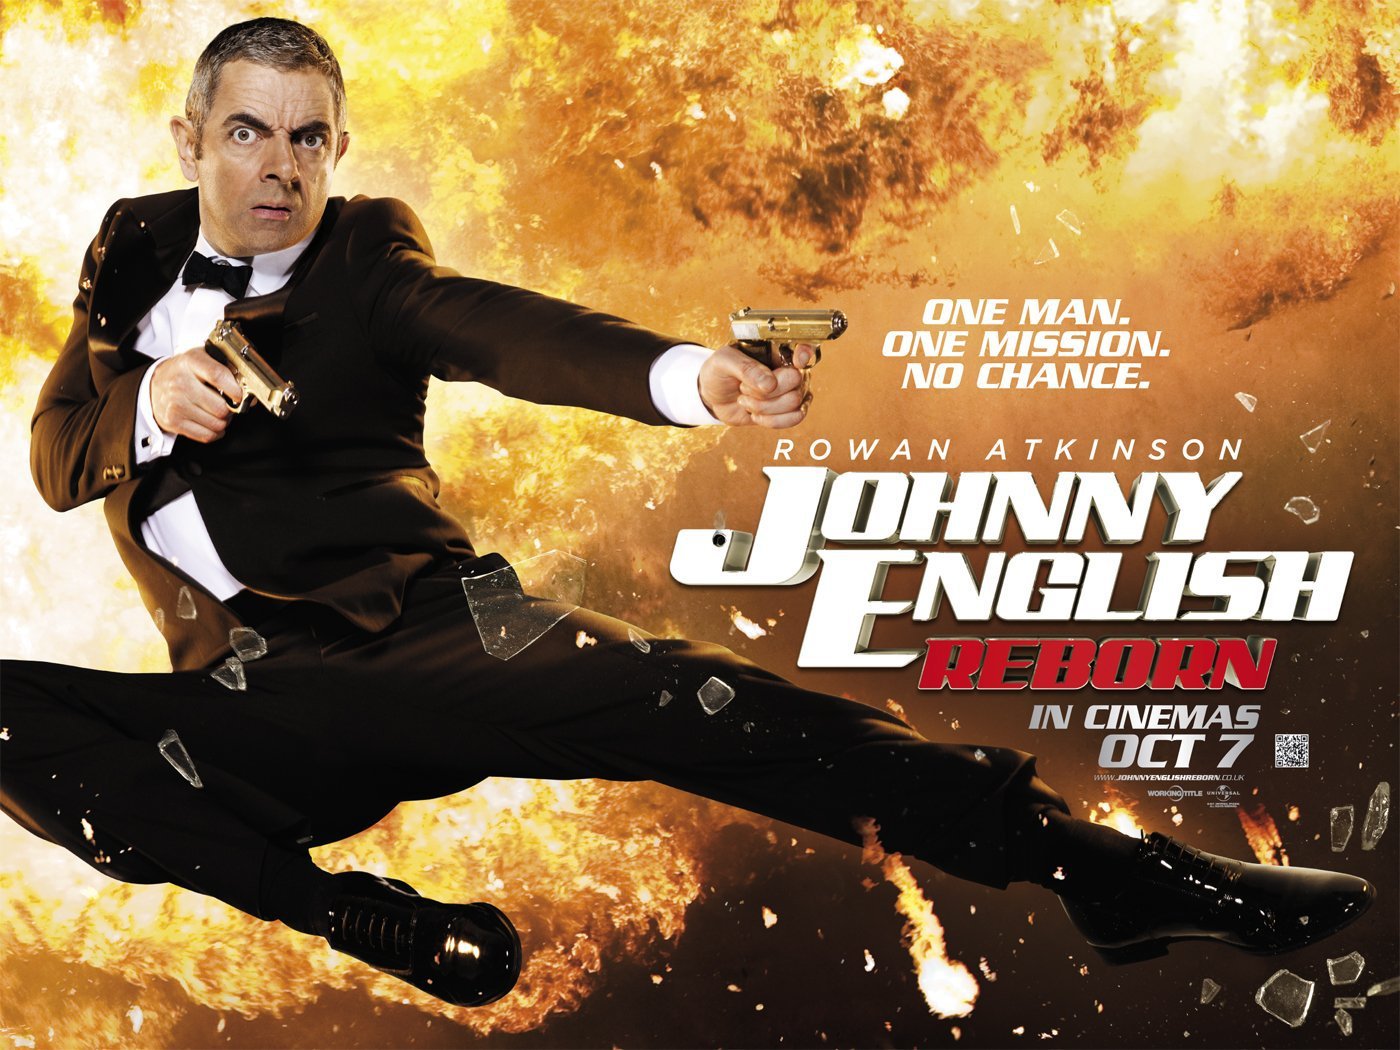 Poster of Universal Pictures' Johnny English Reborn (2011)